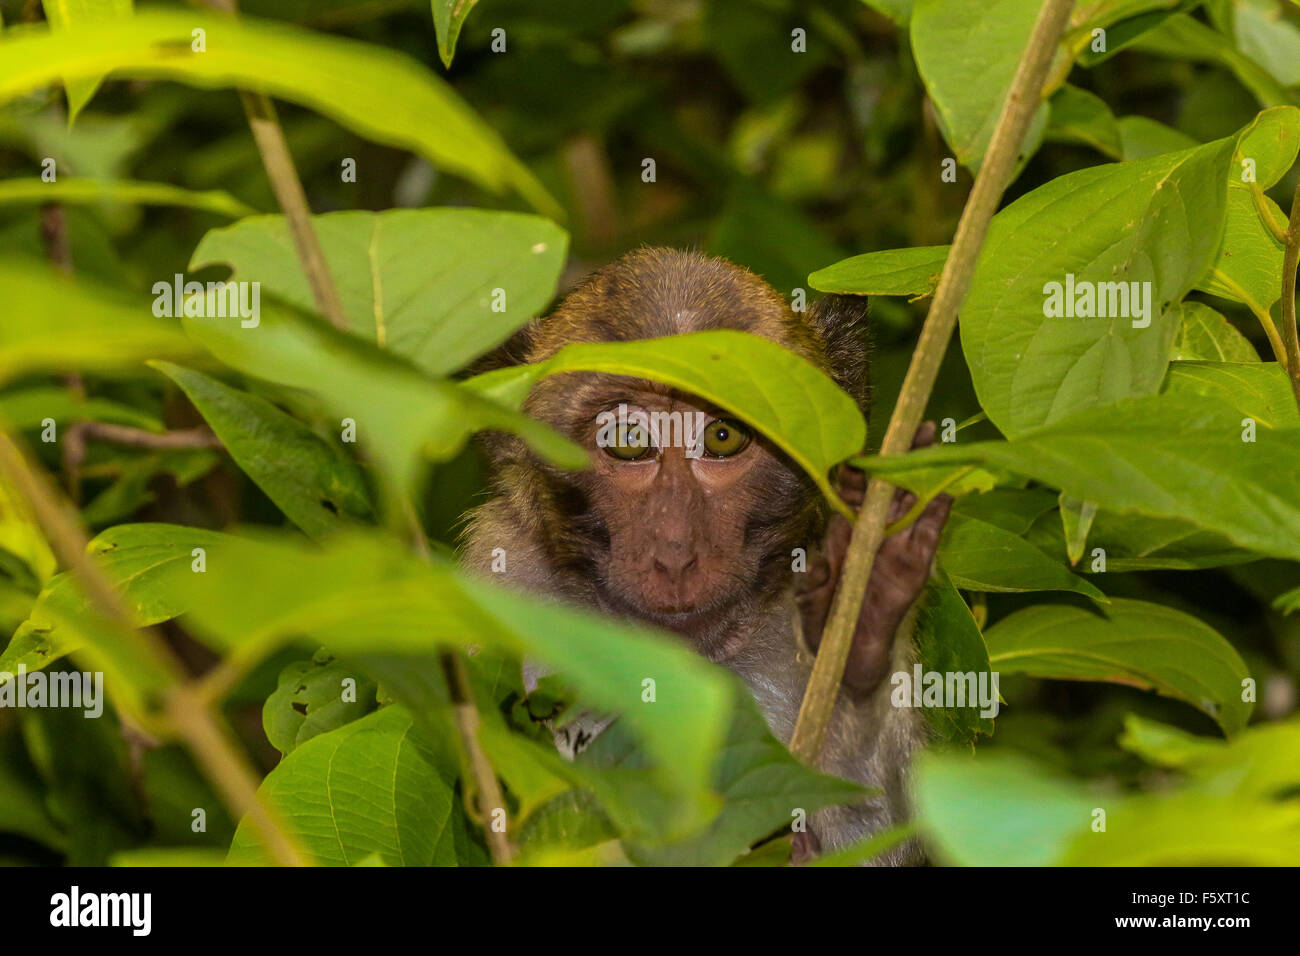 Can you see me ? Shy monkey peeks out from behind some green leaves. Stock Photo